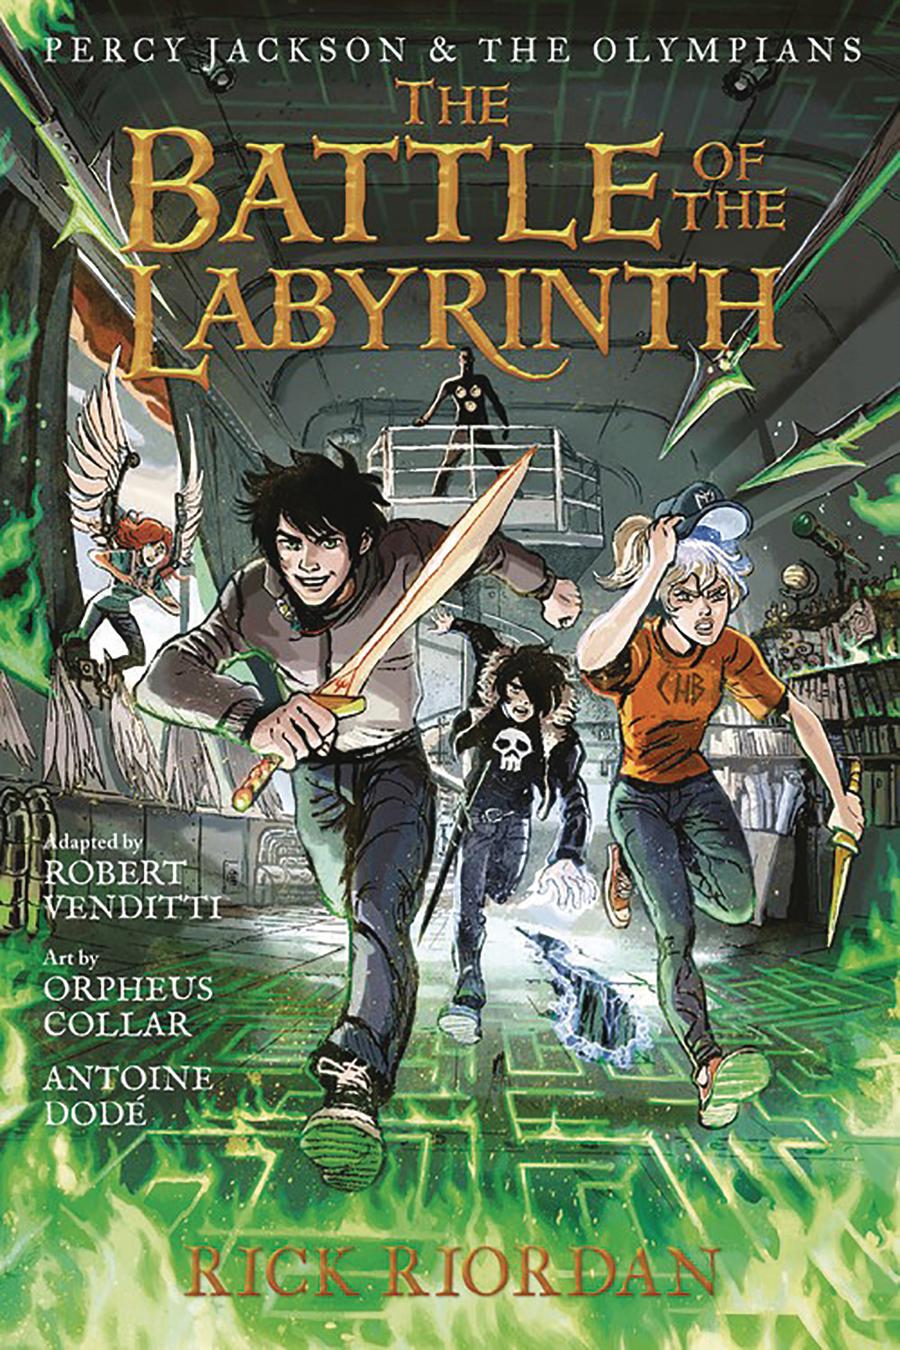 Percy Jackson And The Olympians Vol 4 Battle Of The Labyrinth HC